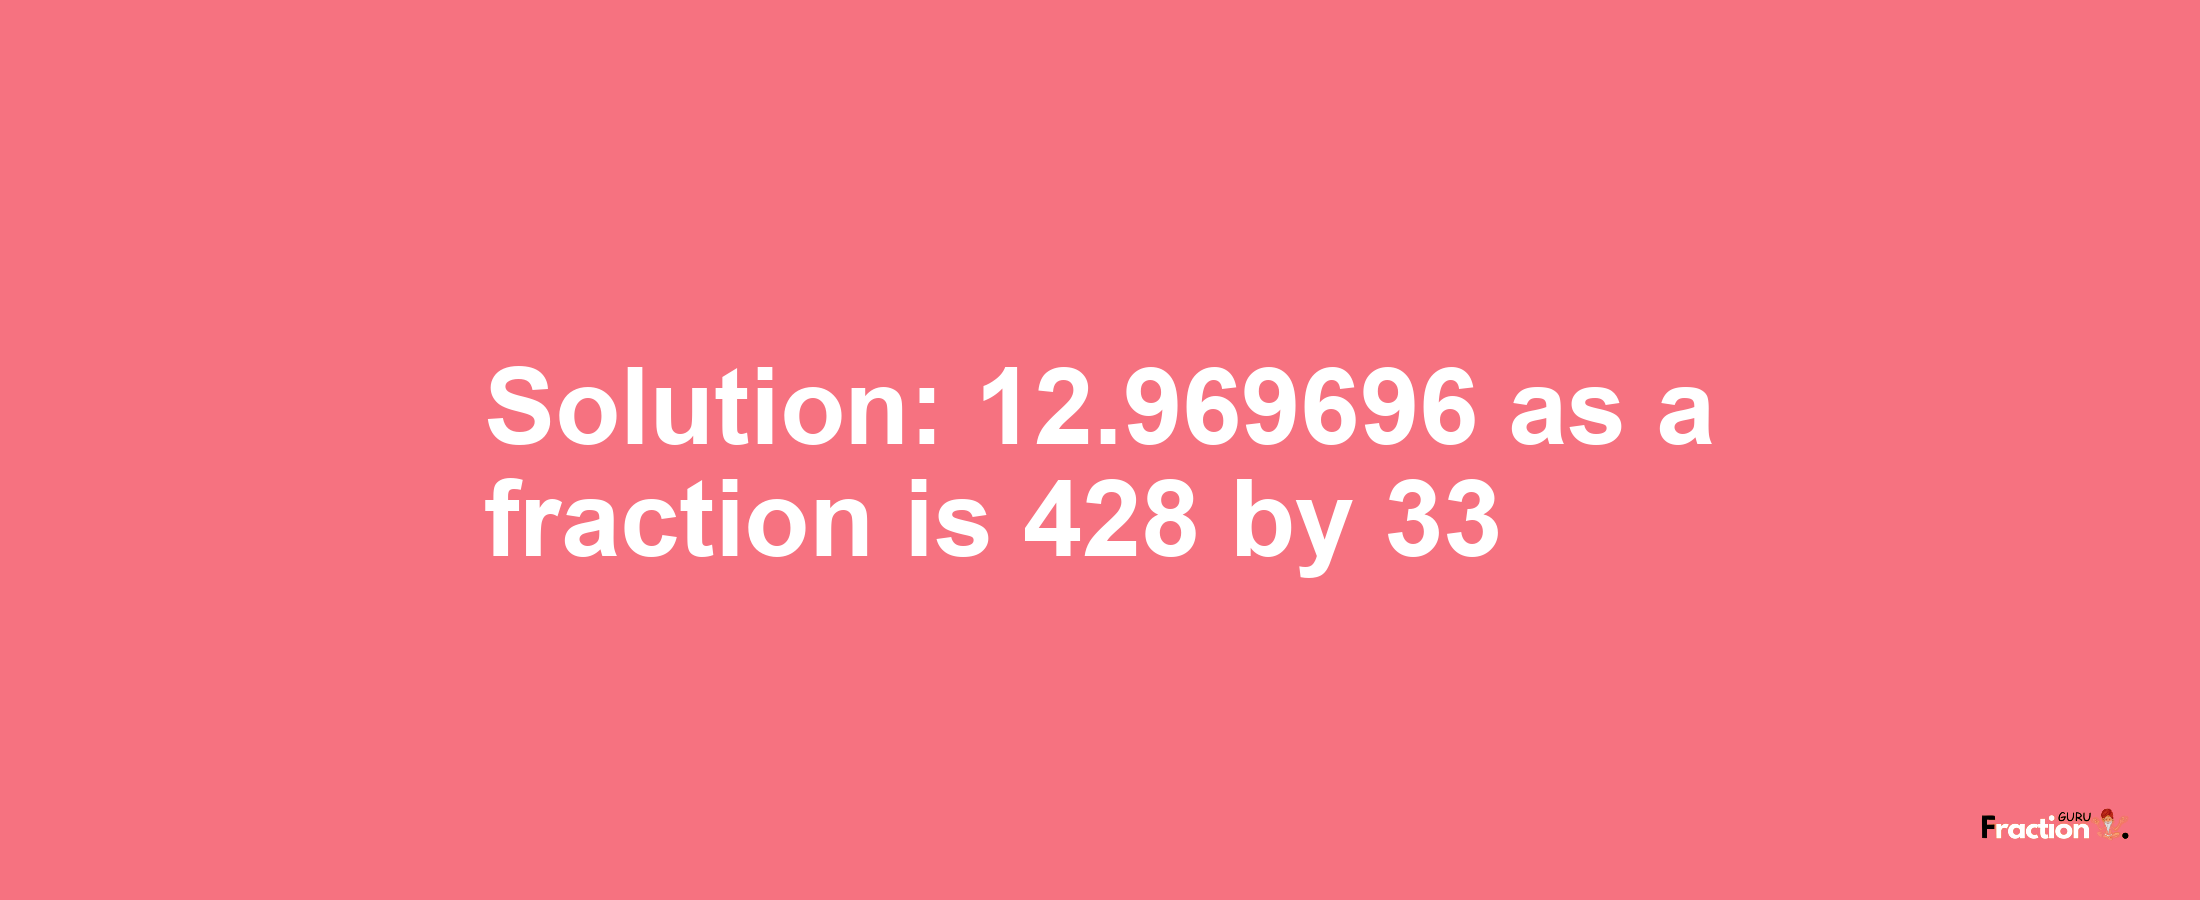 Solution:12.969696 as a fraction is 428/33